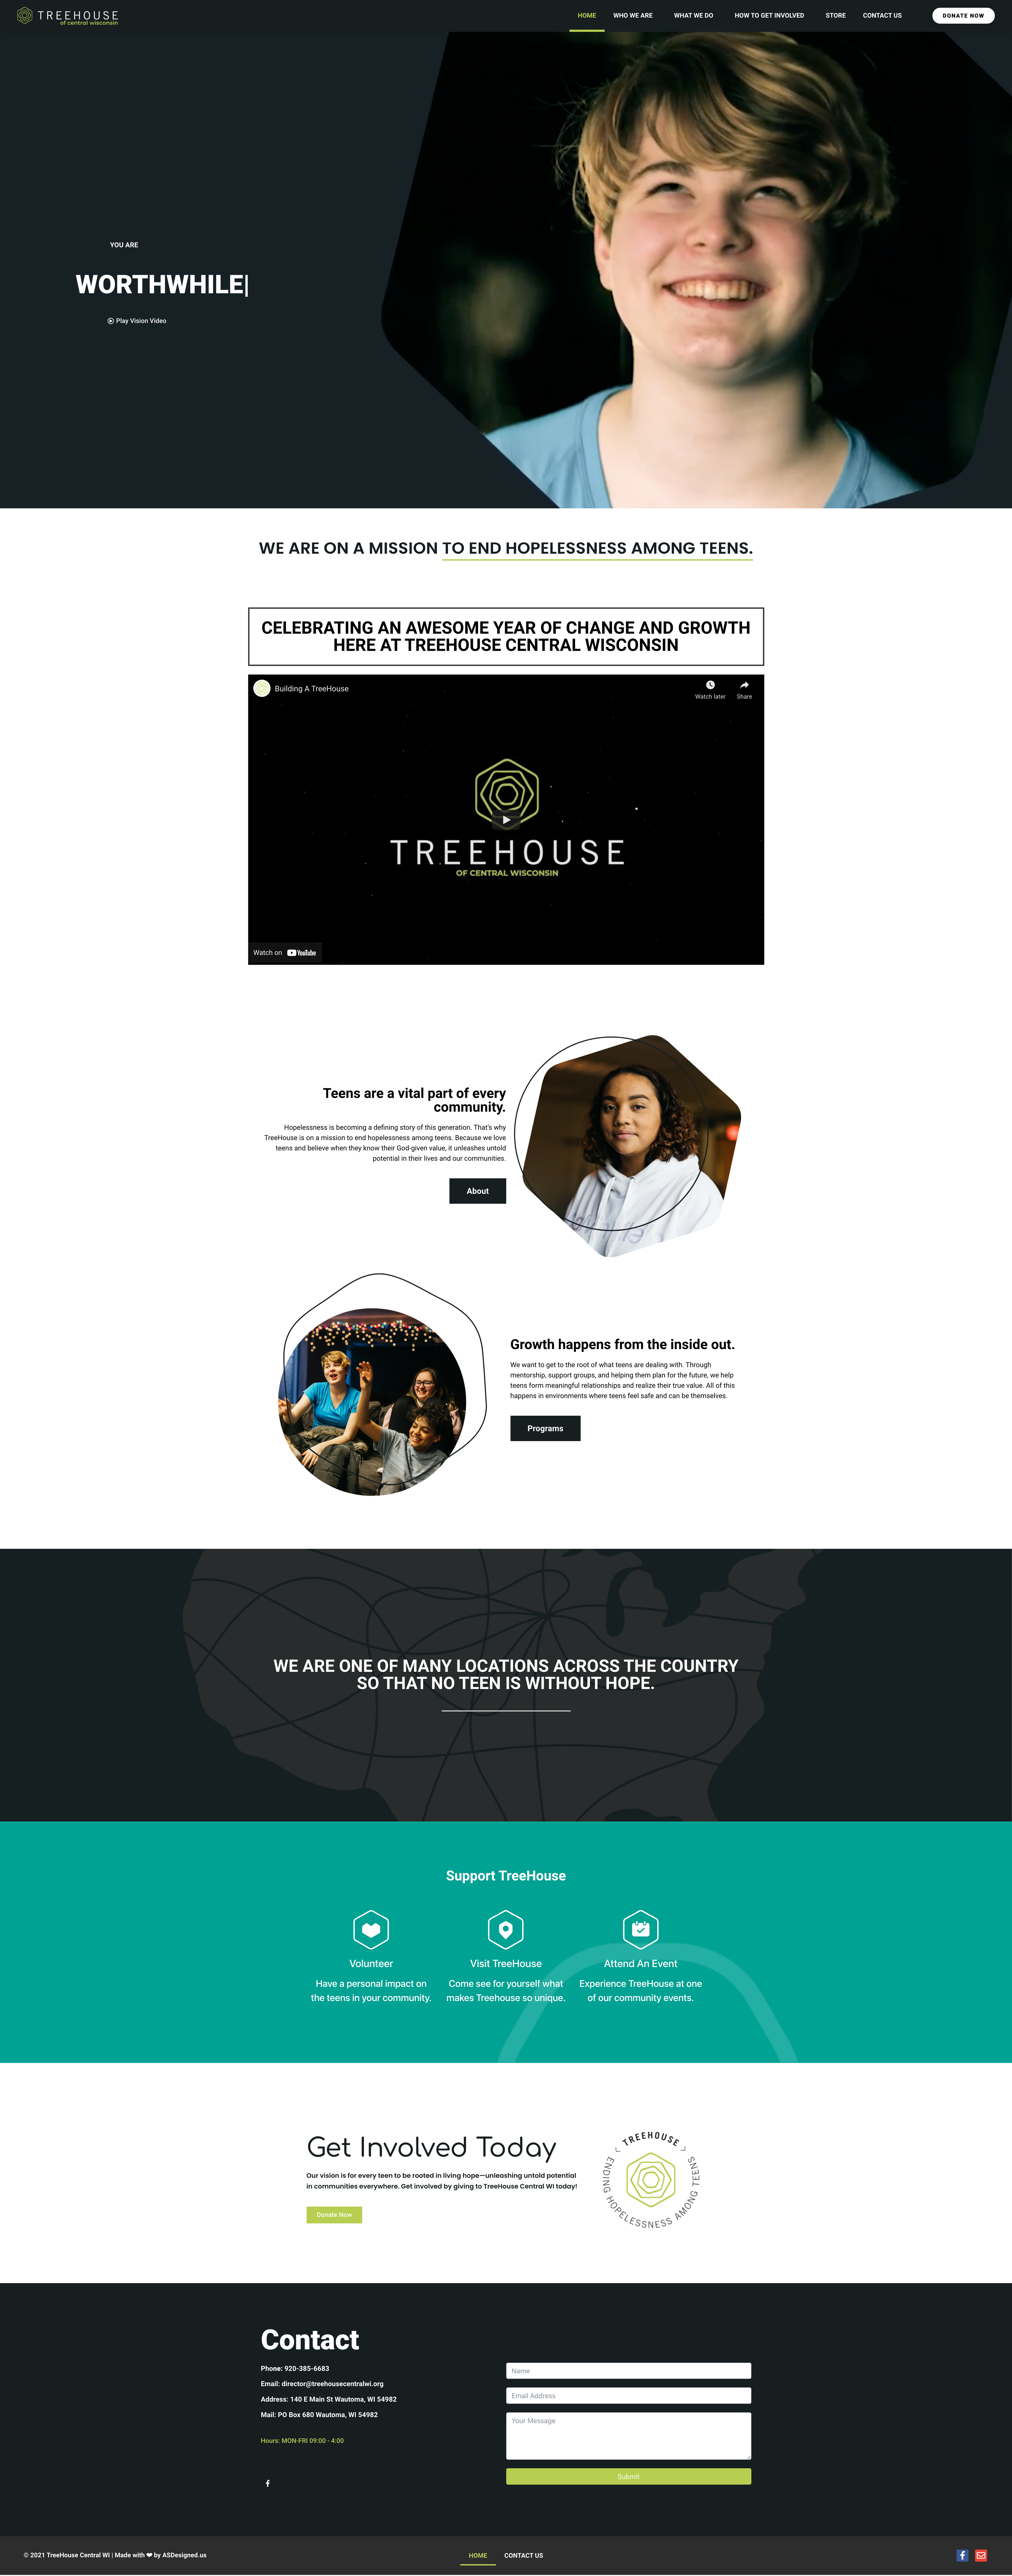 mncw_site_treehouse